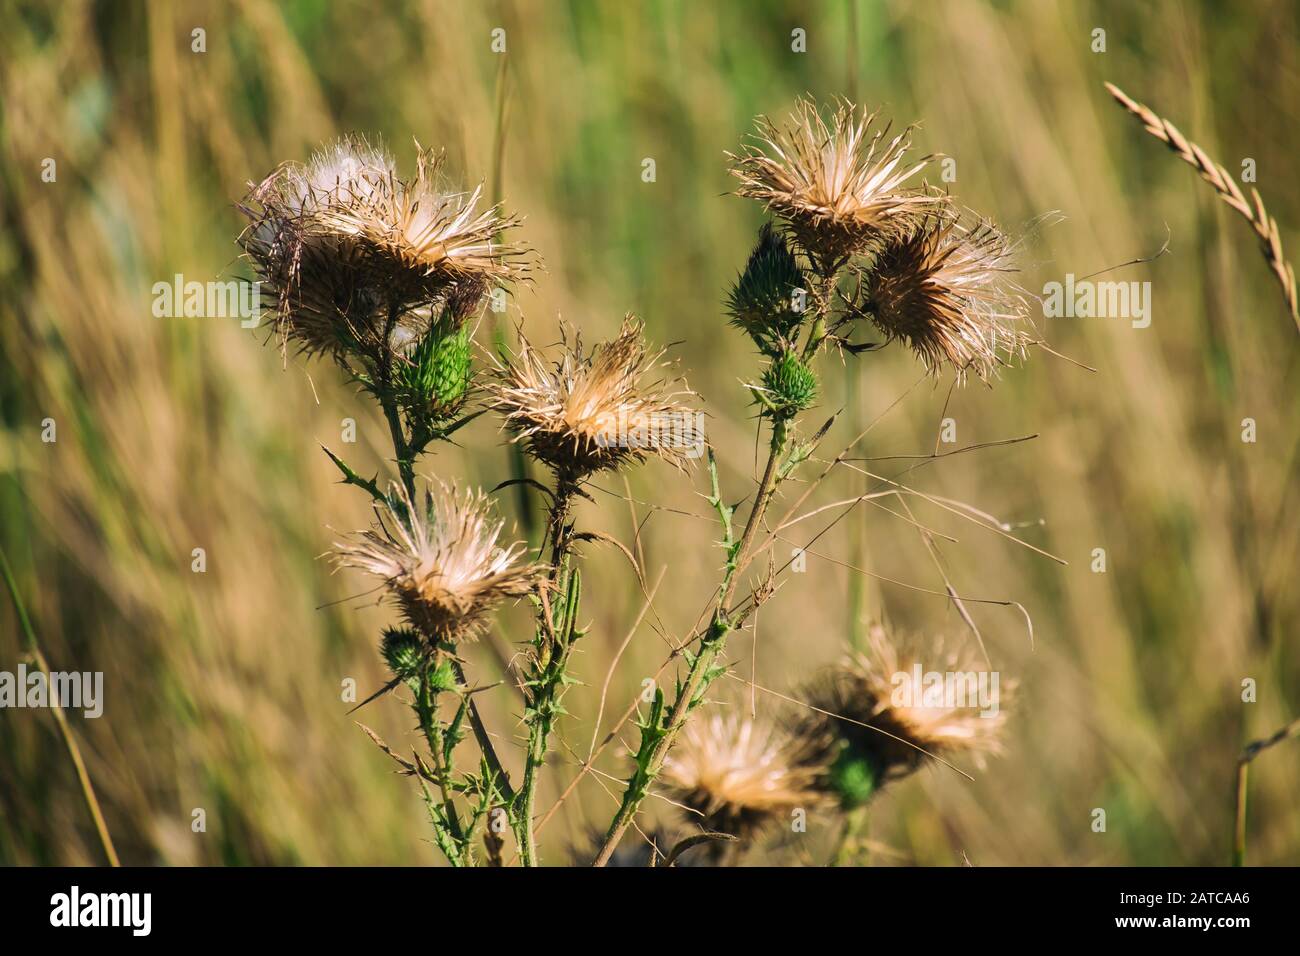 Deflorate flower of welted thistle (Carduus acanthoides) Stock Photo